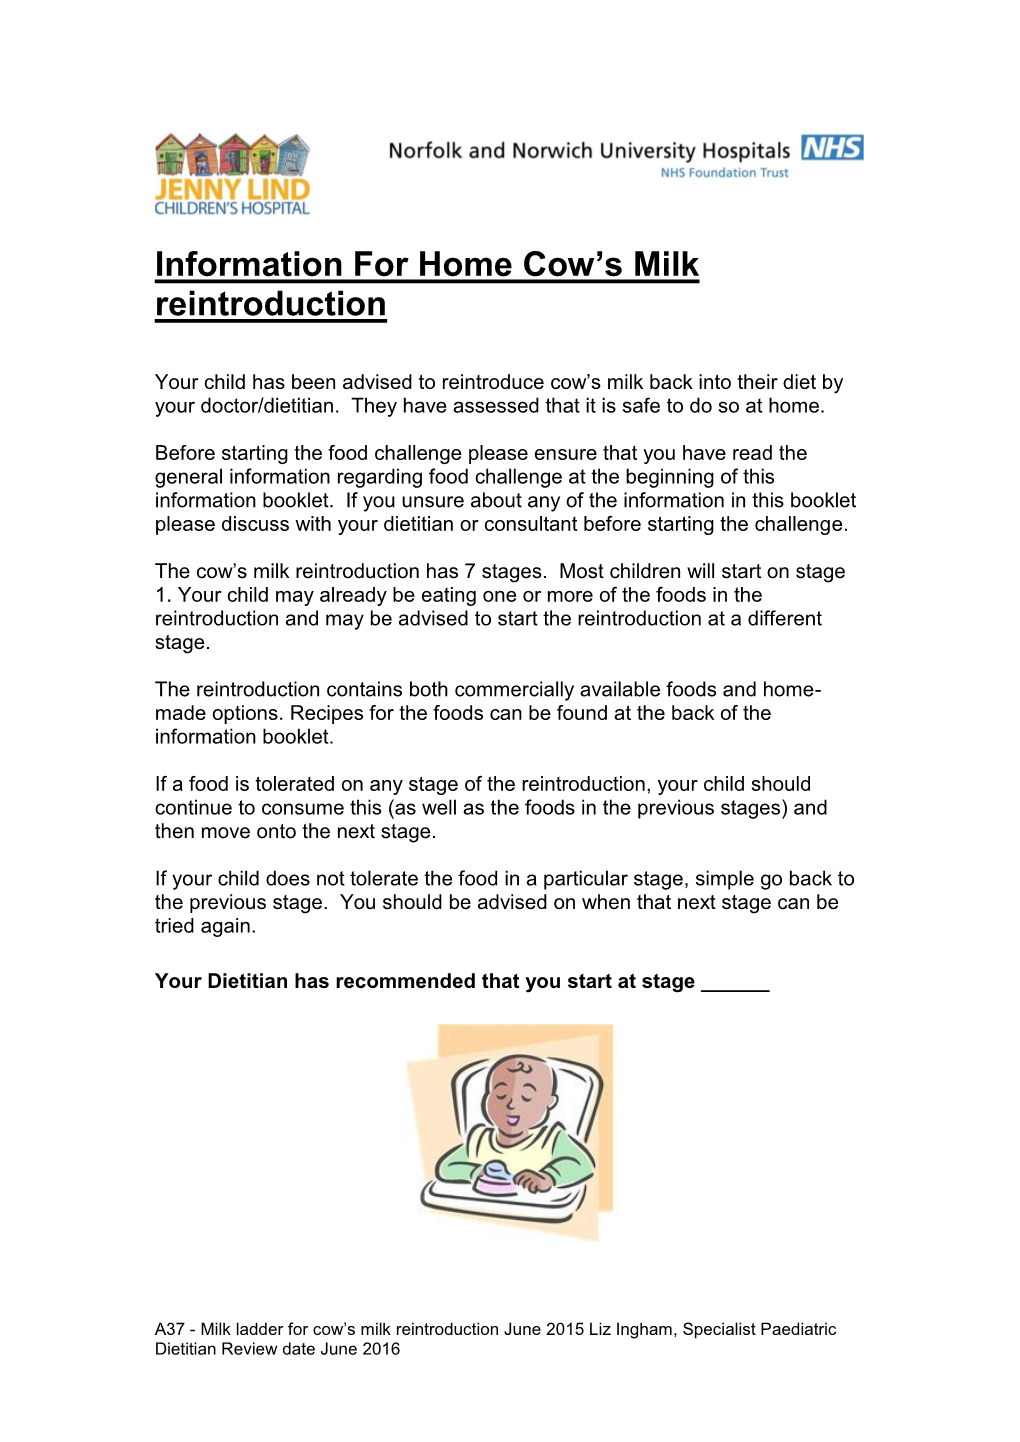 Information for Home Cow's Milk Reintroduction